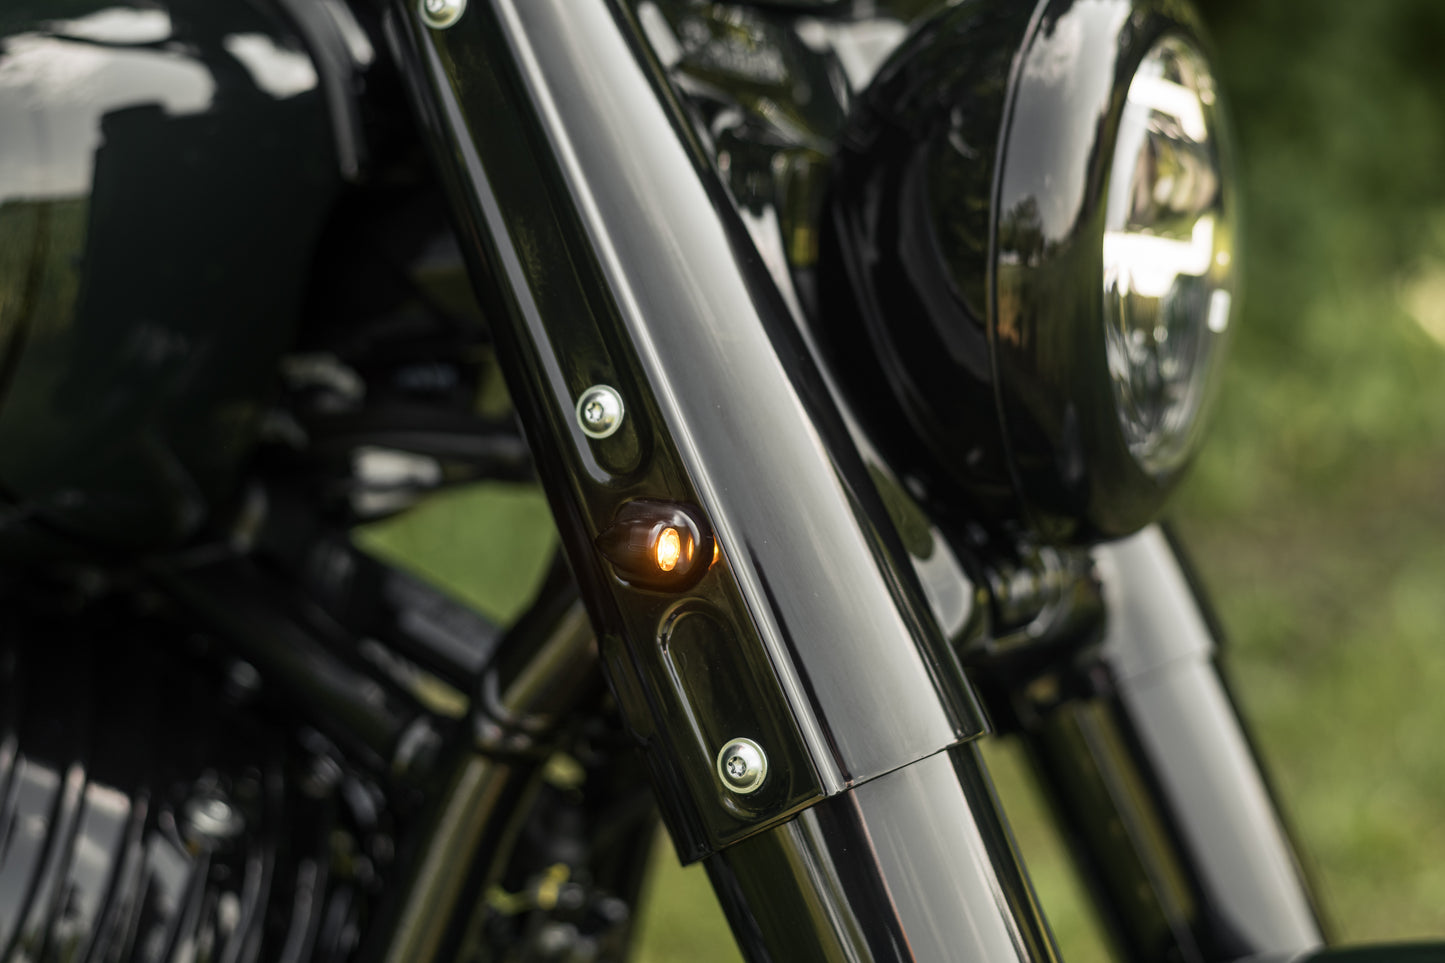 Indian Chief Bobber/Super Chief "Mohawk" Front Led Turn Signals